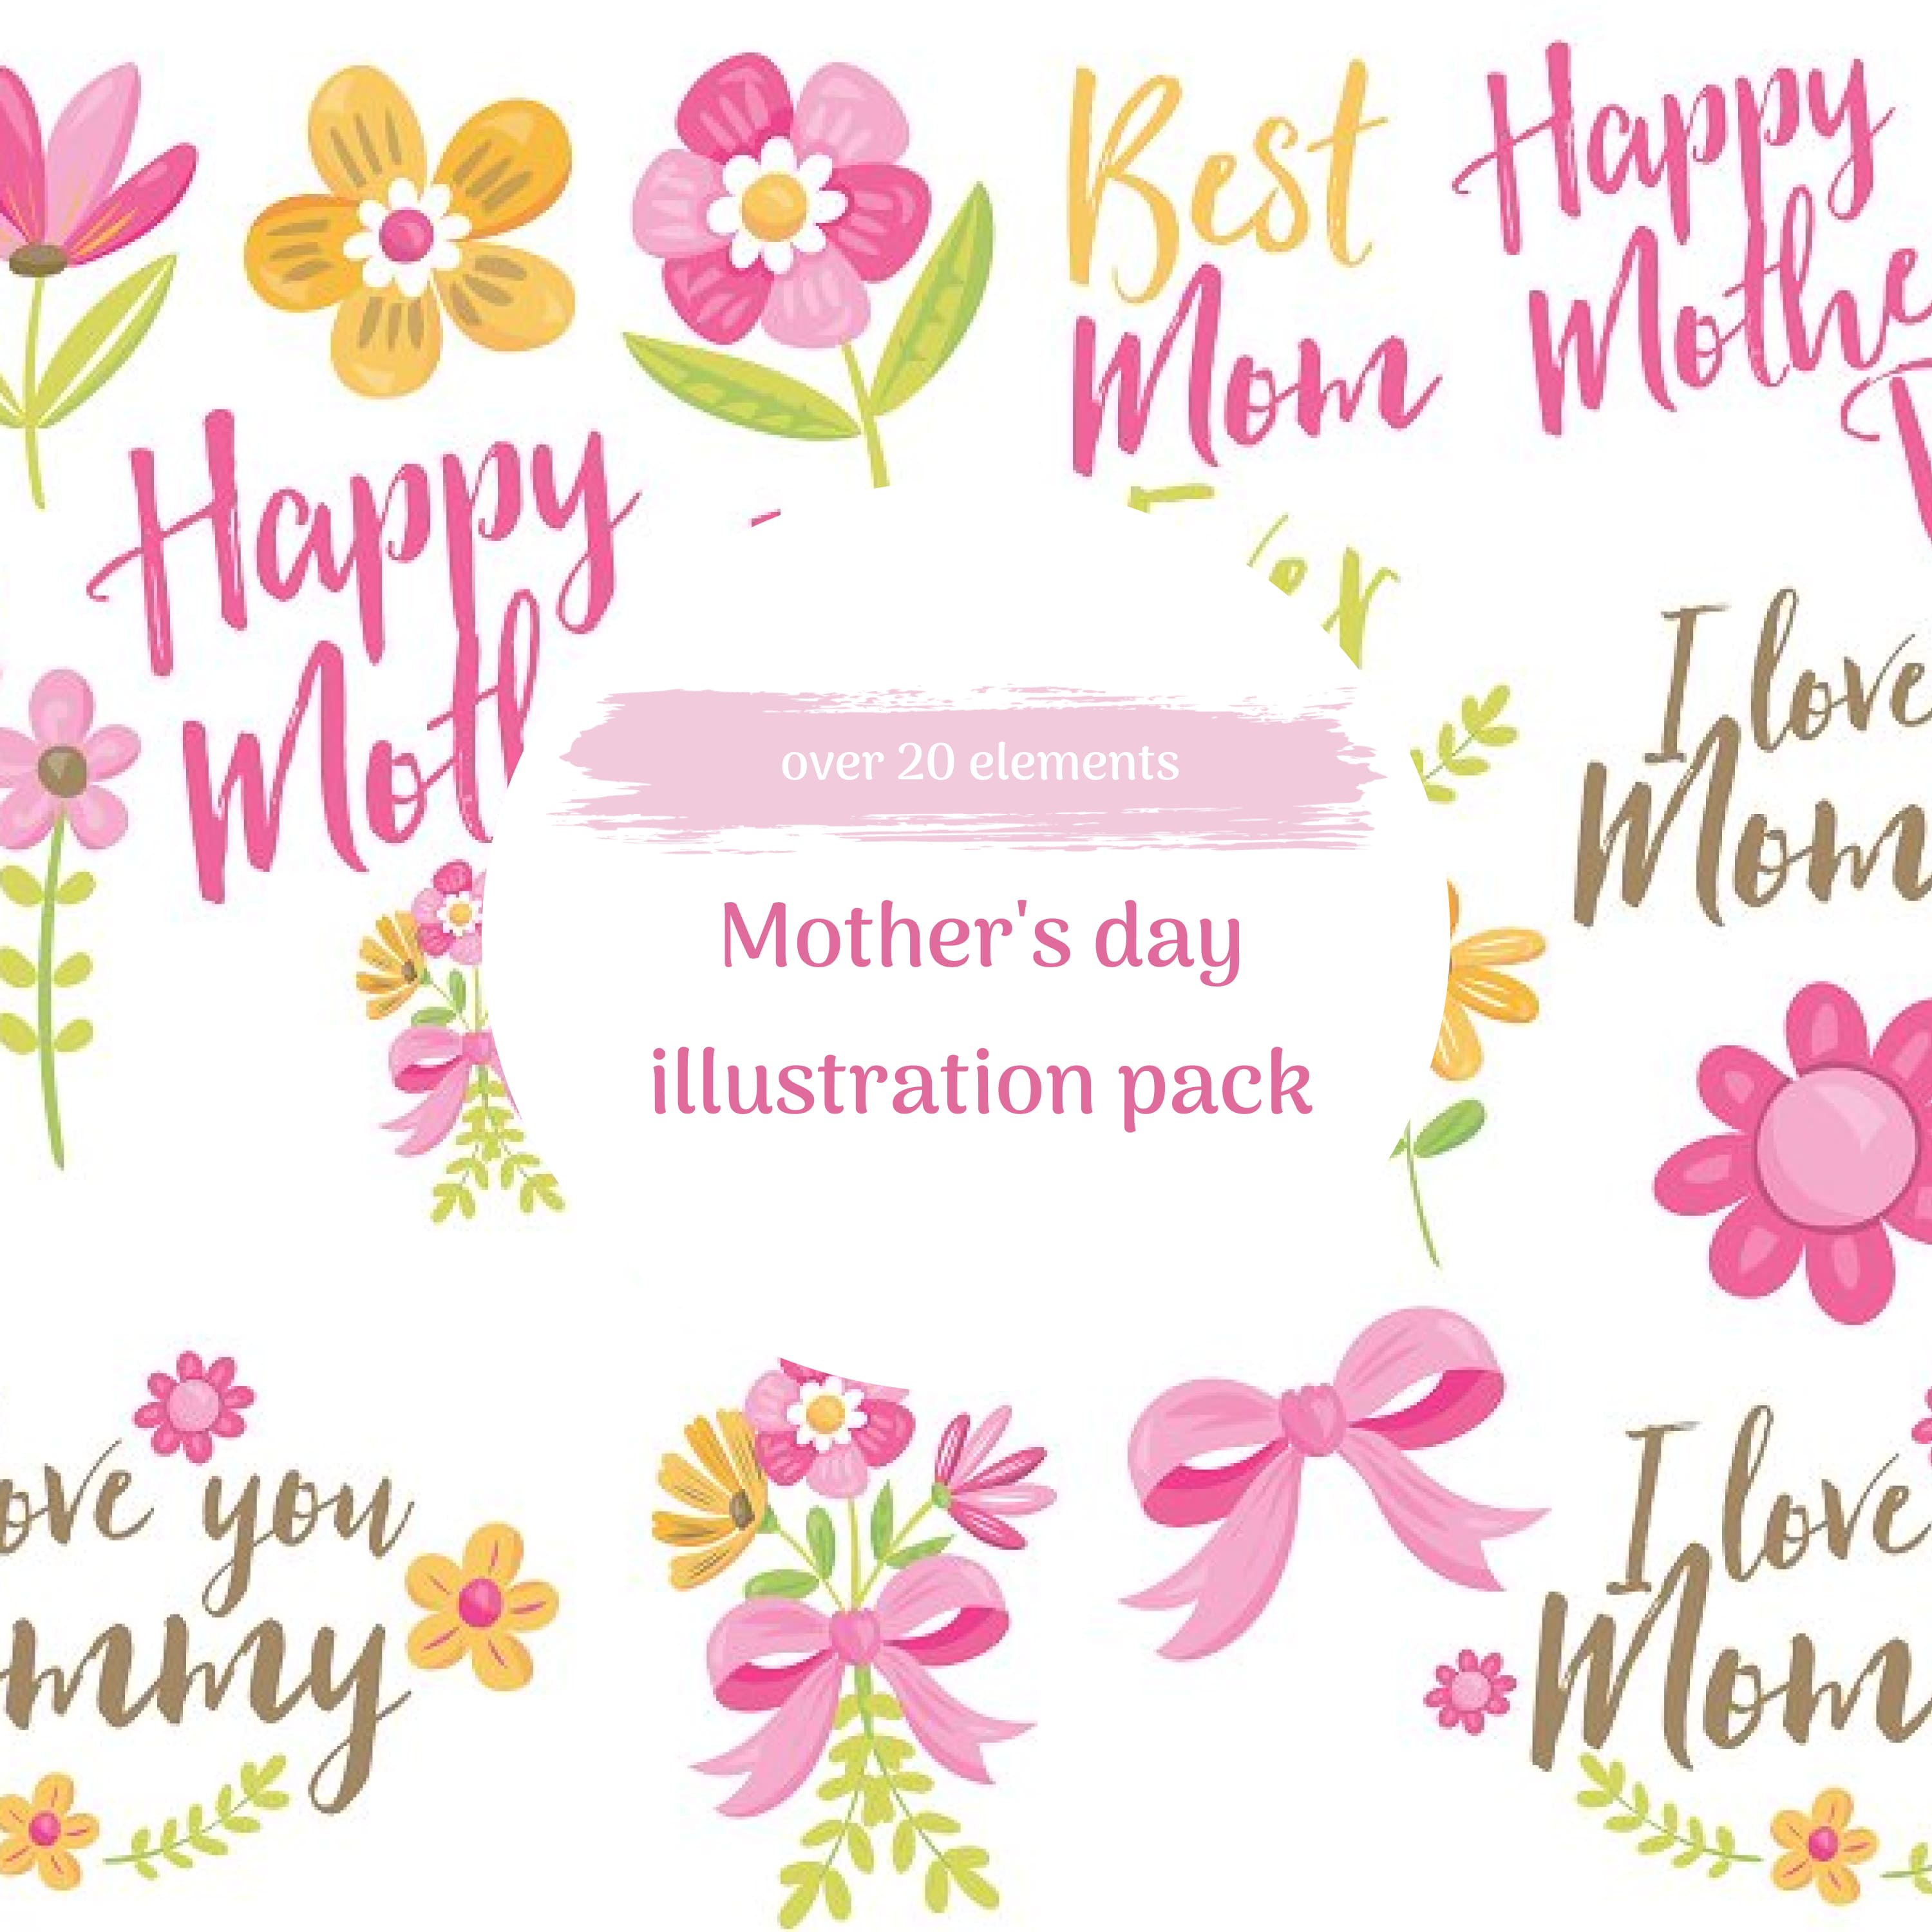 Mother's day illustration pack cover.